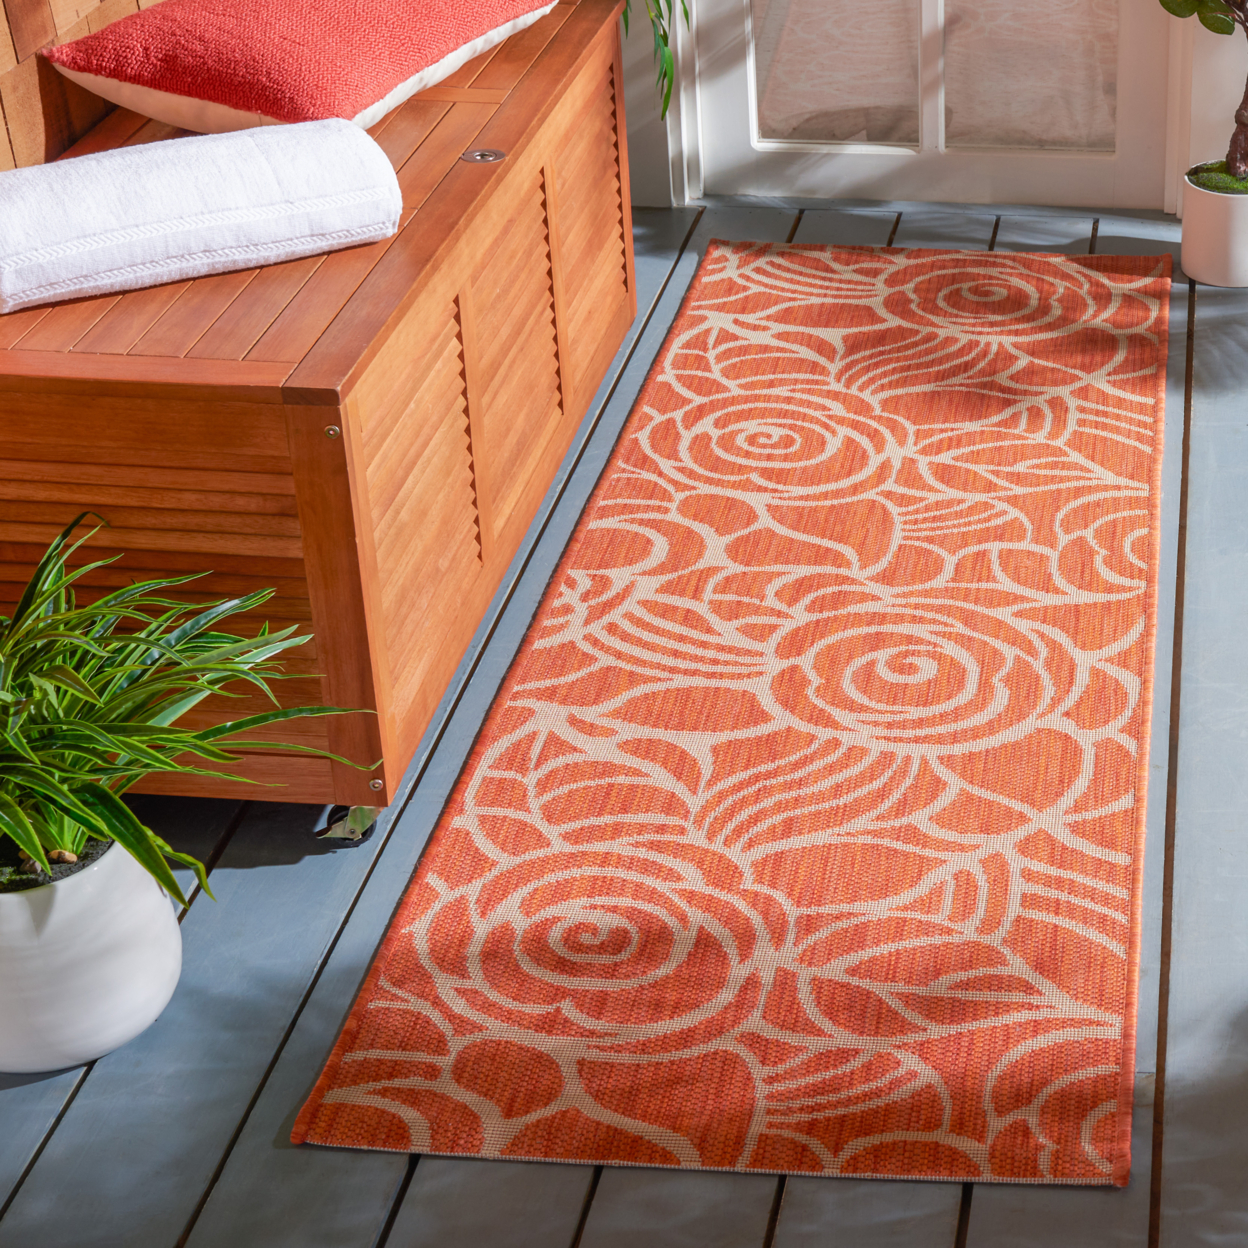 SAFAVIEH Outdoor CY5141A Courtyard Collection Rust / Sand Rug - 2' 7 X 8' 2